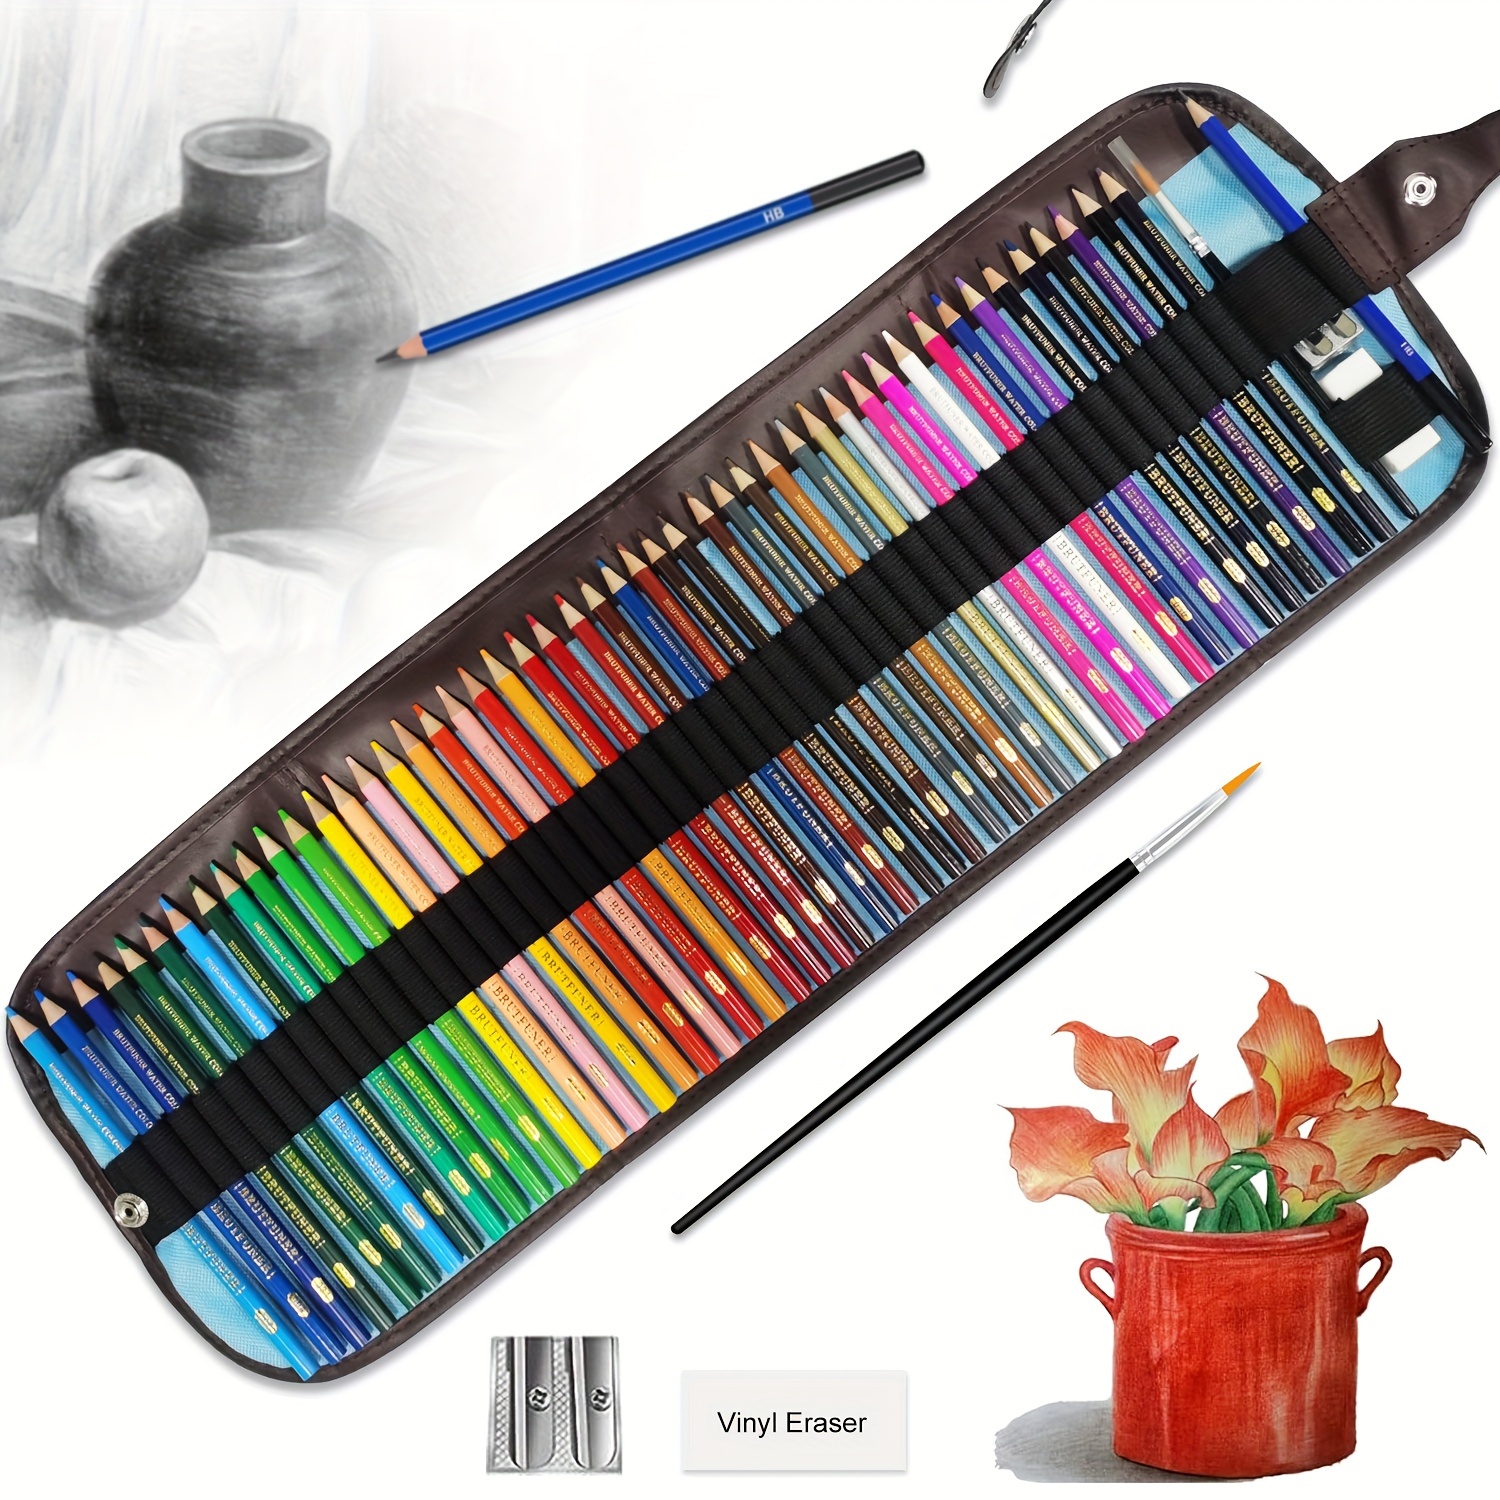 

53pcs Watercolor Pencil Set, Perfect For Mixing Wet Or Dry Effects - Perfect For Coloring Books - Adult Beginner Water-soluble Pencils